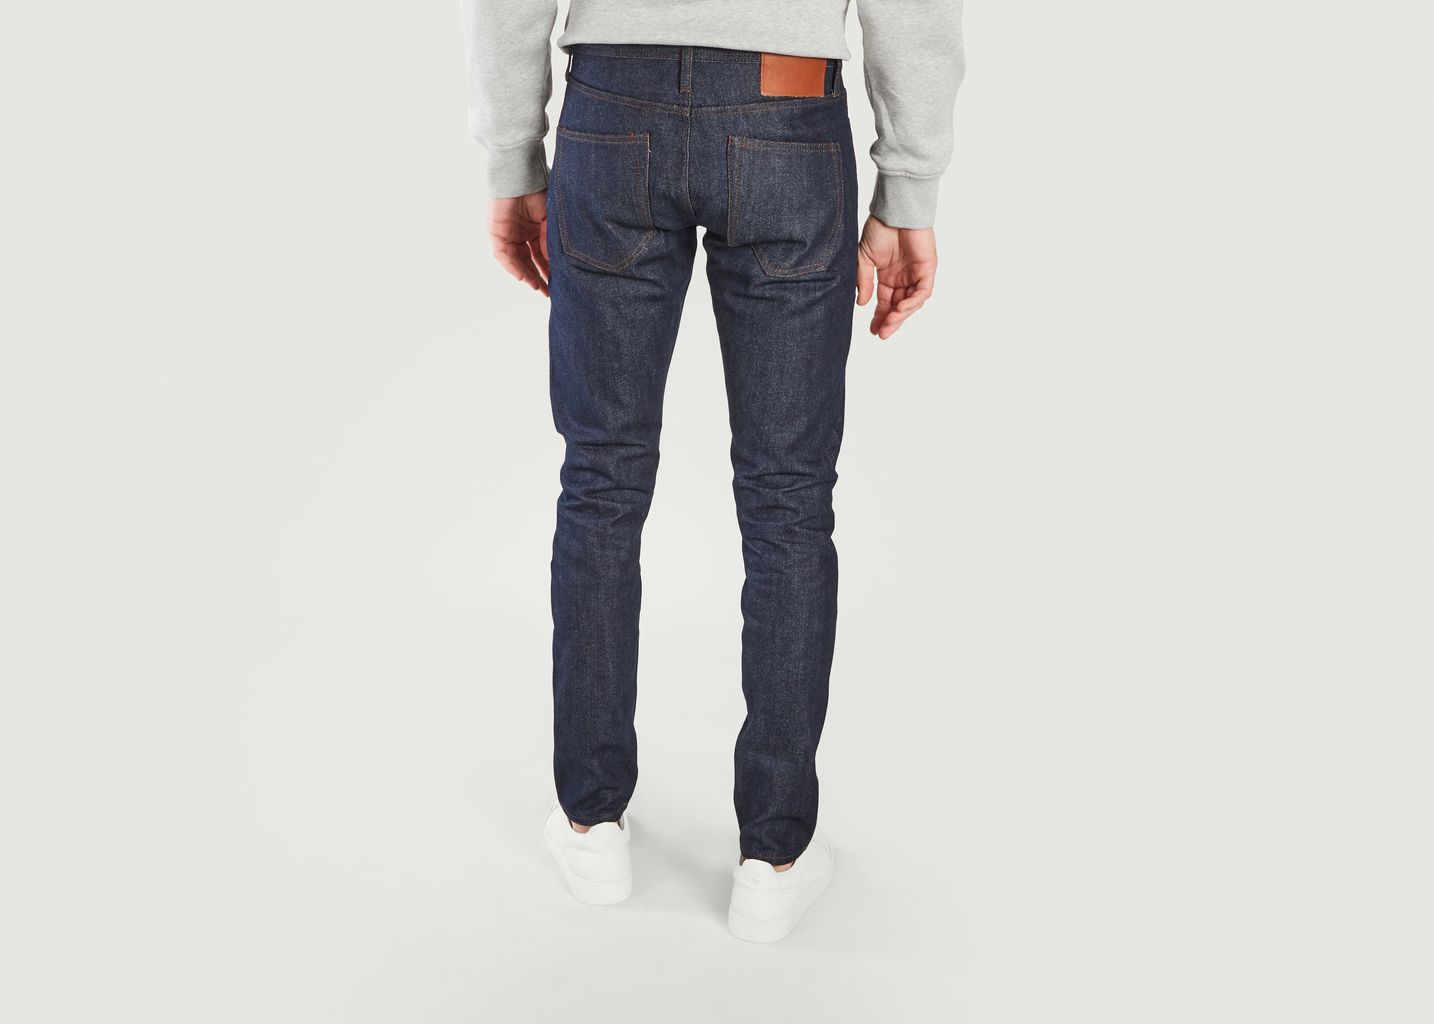 Jean UB401 tight fit 14,5 oz - The Unbranded Brand